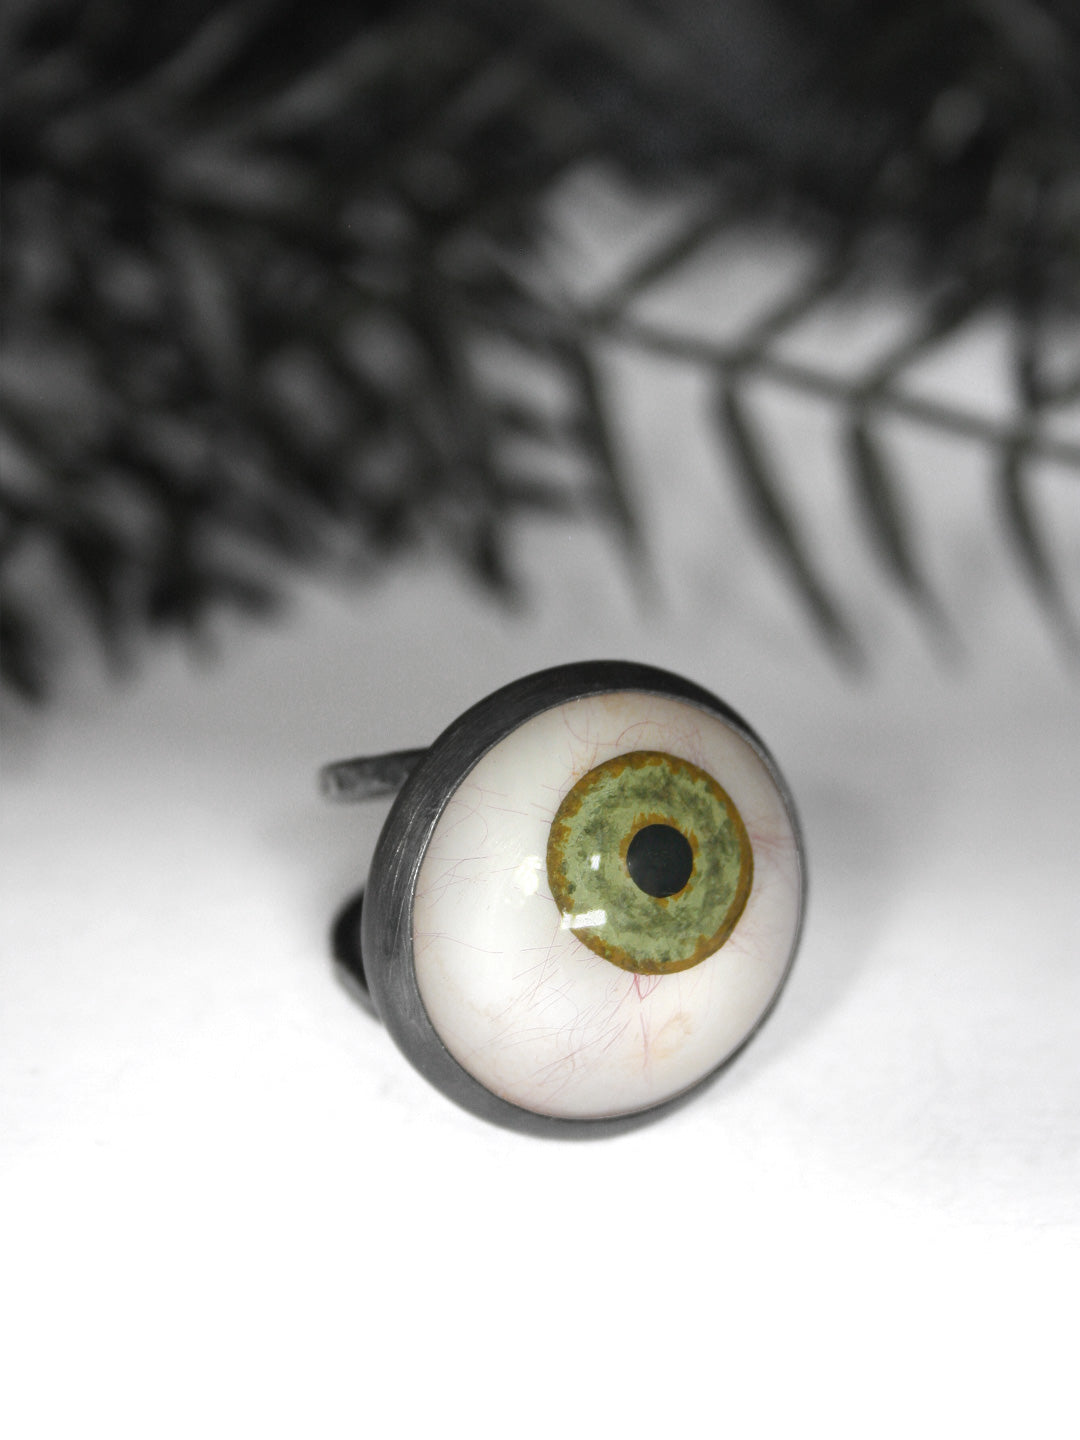 Stop using the eye ring for fake headless and actually use it